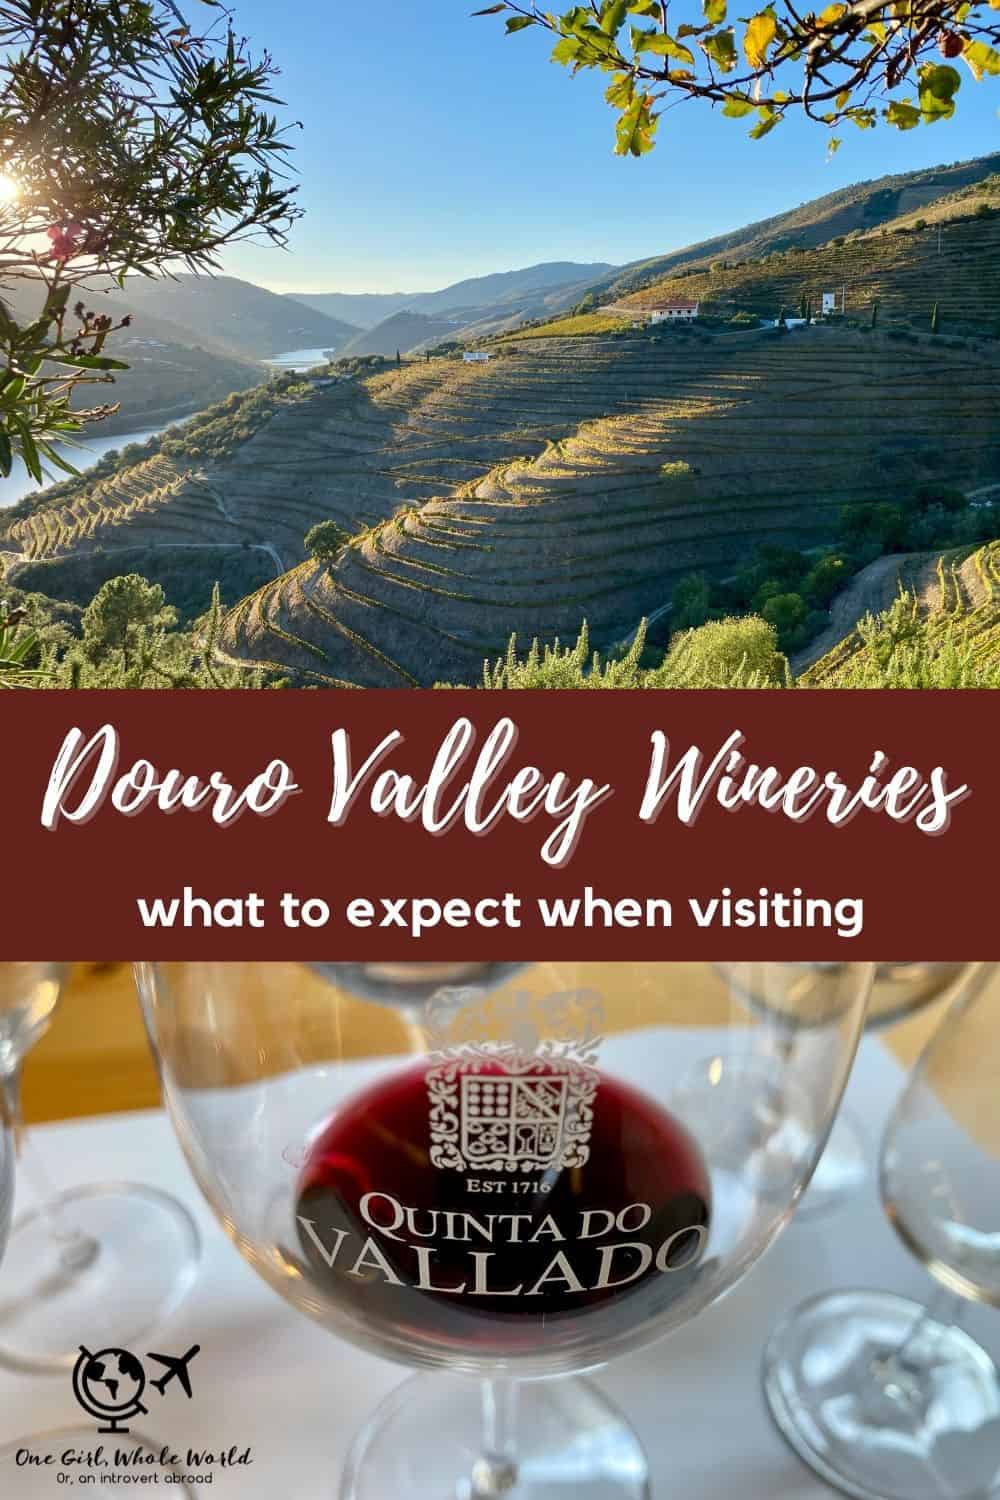 Douro Valley Wineries: A Must on a Portugal Itinerary | If you're visiting northern Portugal then the Douro Valley and its port wineries have to be on your trip itinerary. I visited 3 different quintas (Quinta do Vallado, Quinta do Bomfim, and Quinta Nova), here's a look at my experience. Visiting port wineries, a great day trip or longer from Porto. #dourovalley #portugal #porto #portwine #winery